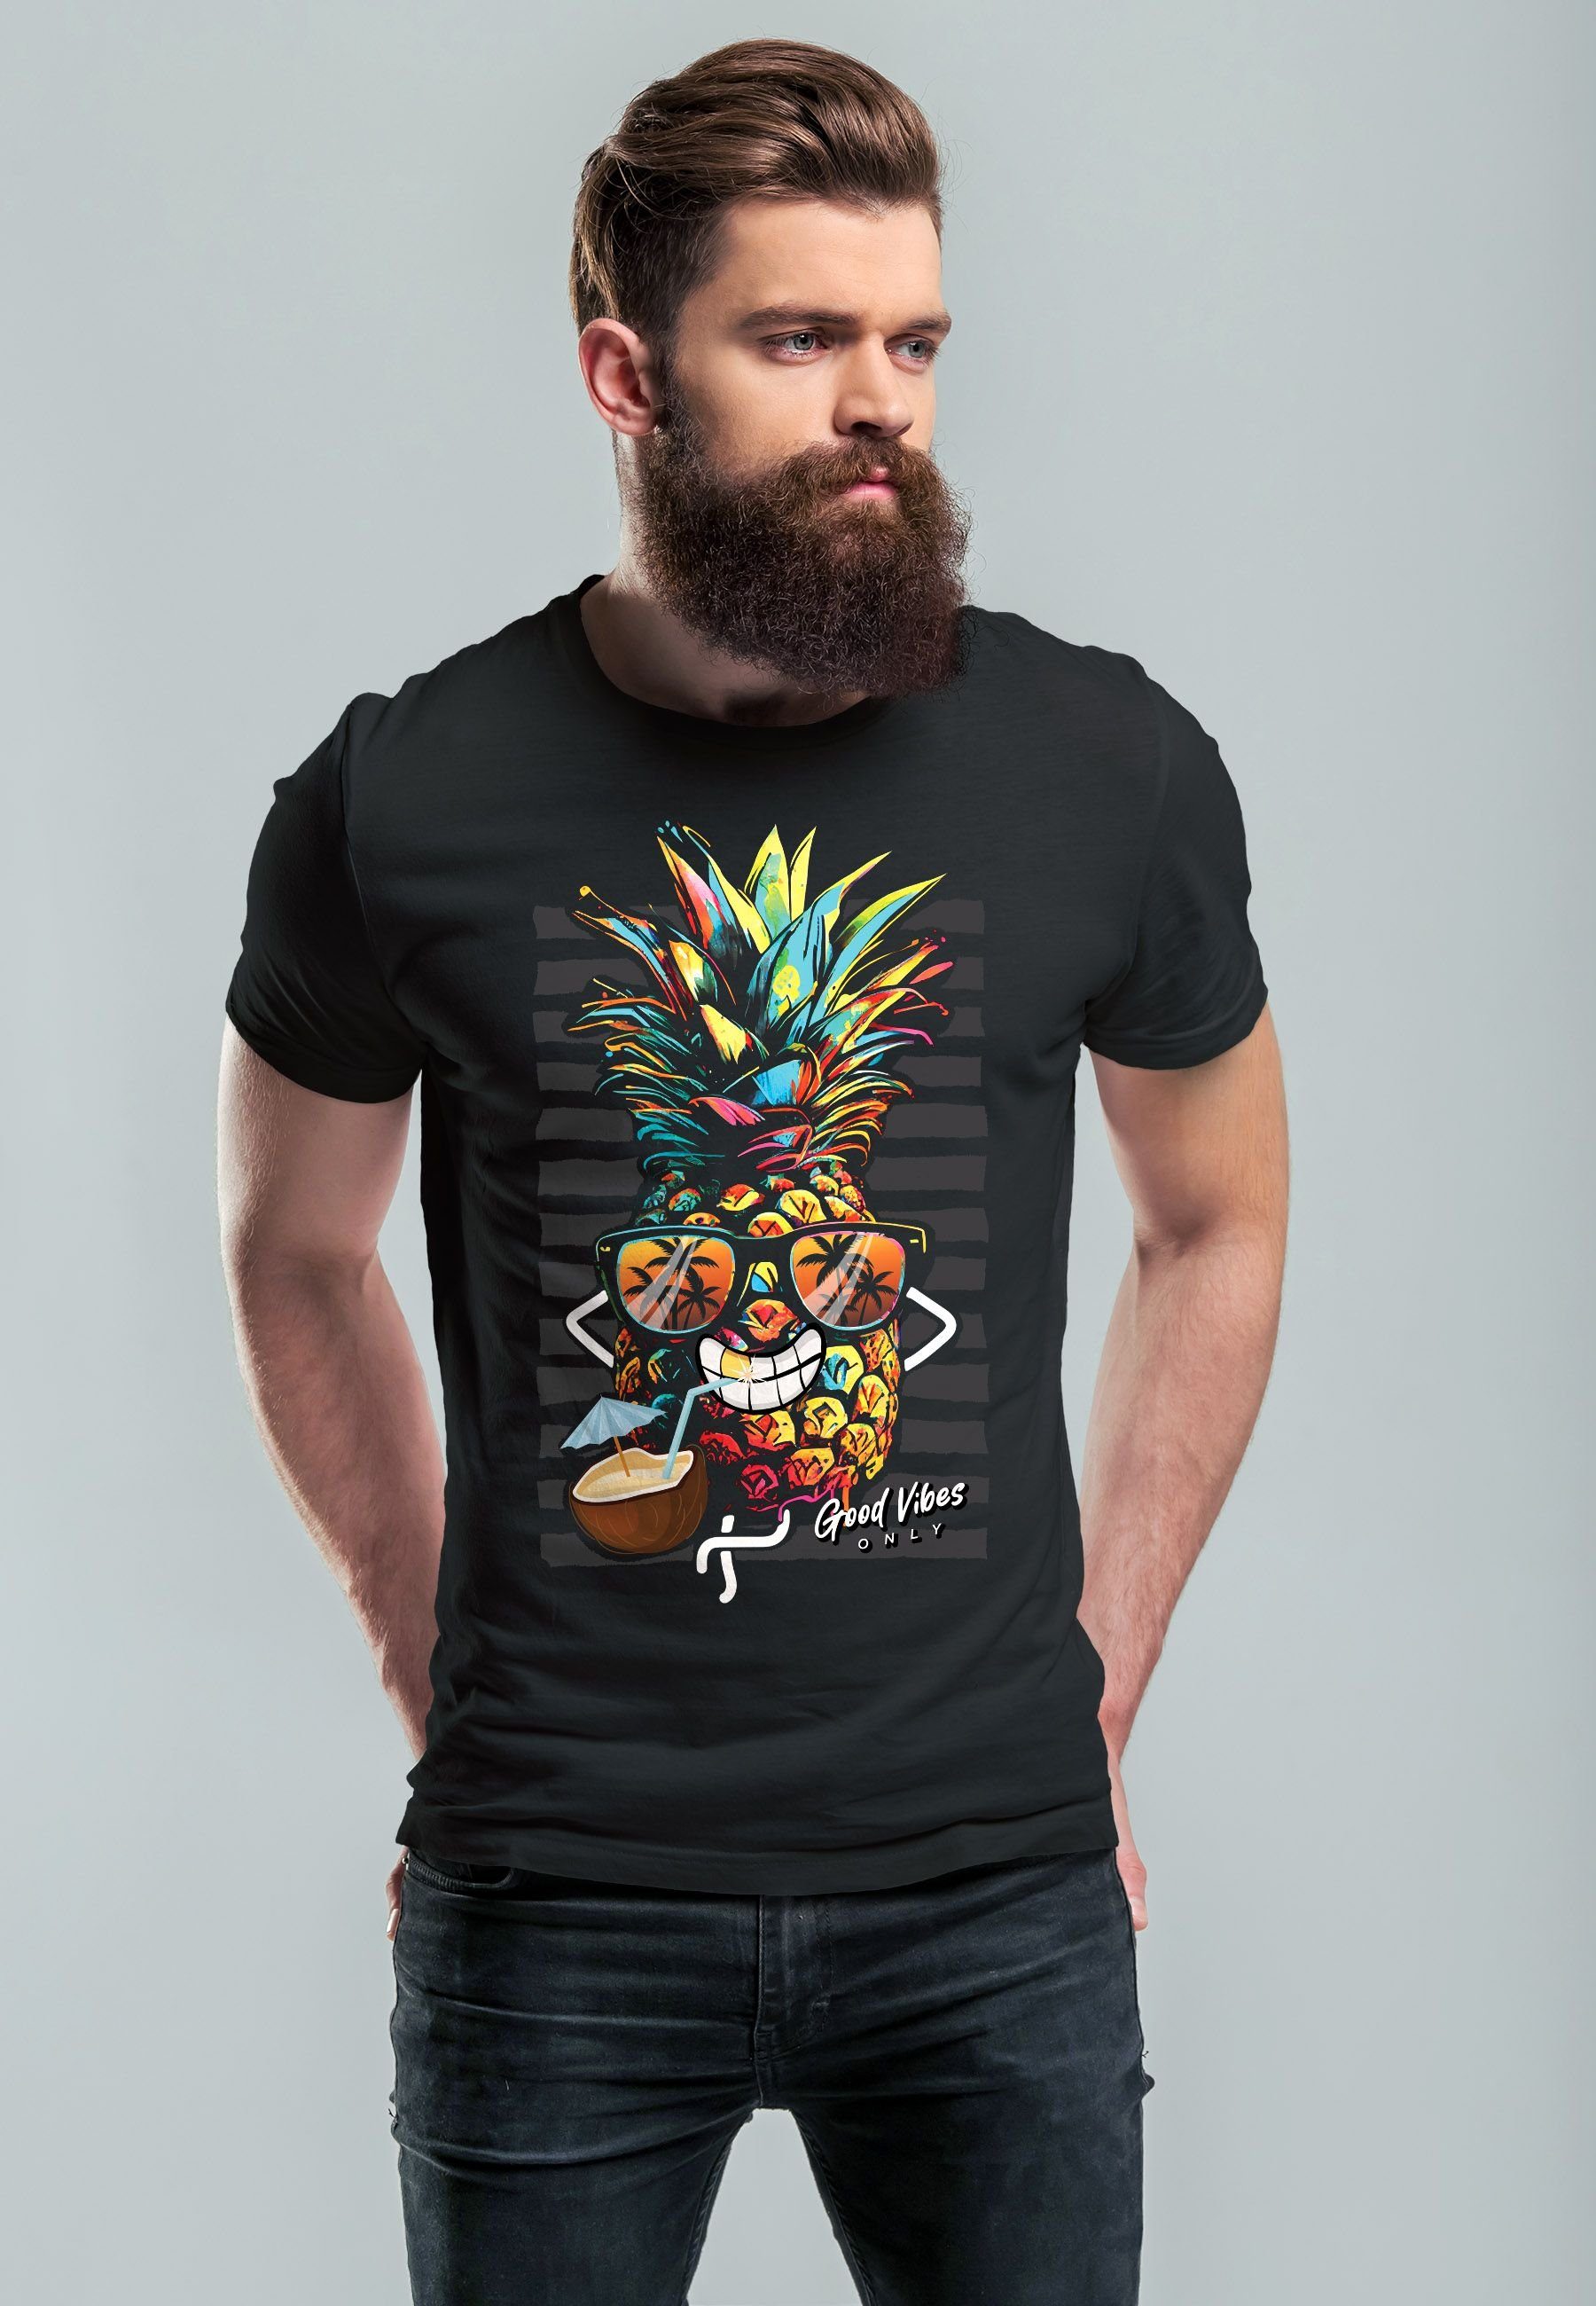 Good Sommer Print-Shirt S Ananas T-Shirt Herren Sonne Vibes Party Cocktail mit Neverless Fashion Print